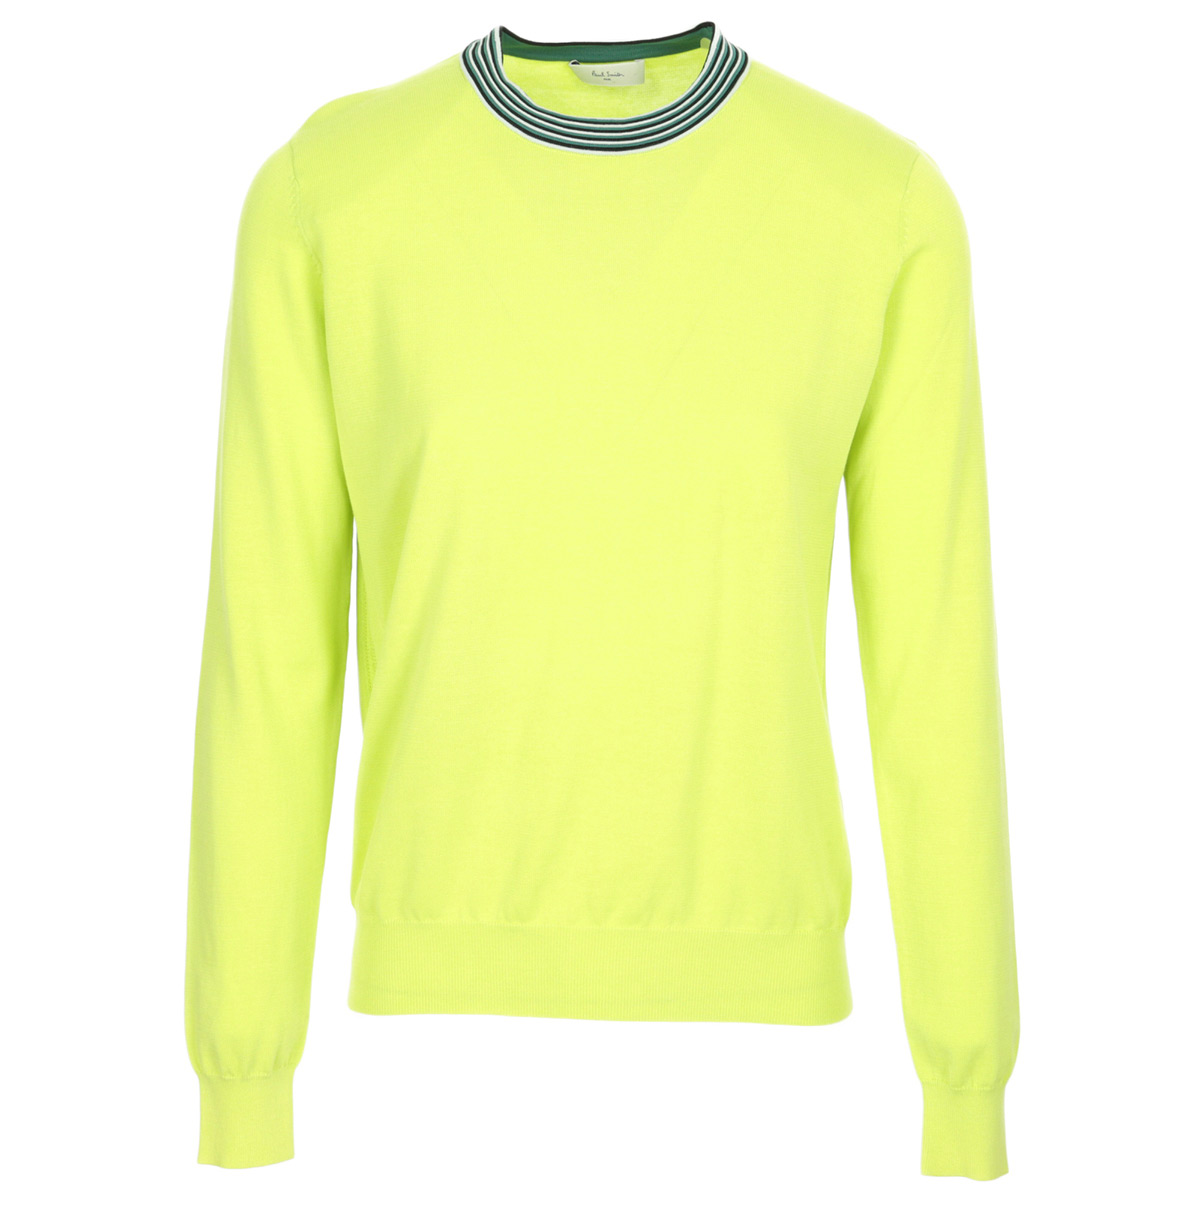 PS by Paul Smith Pull over coton